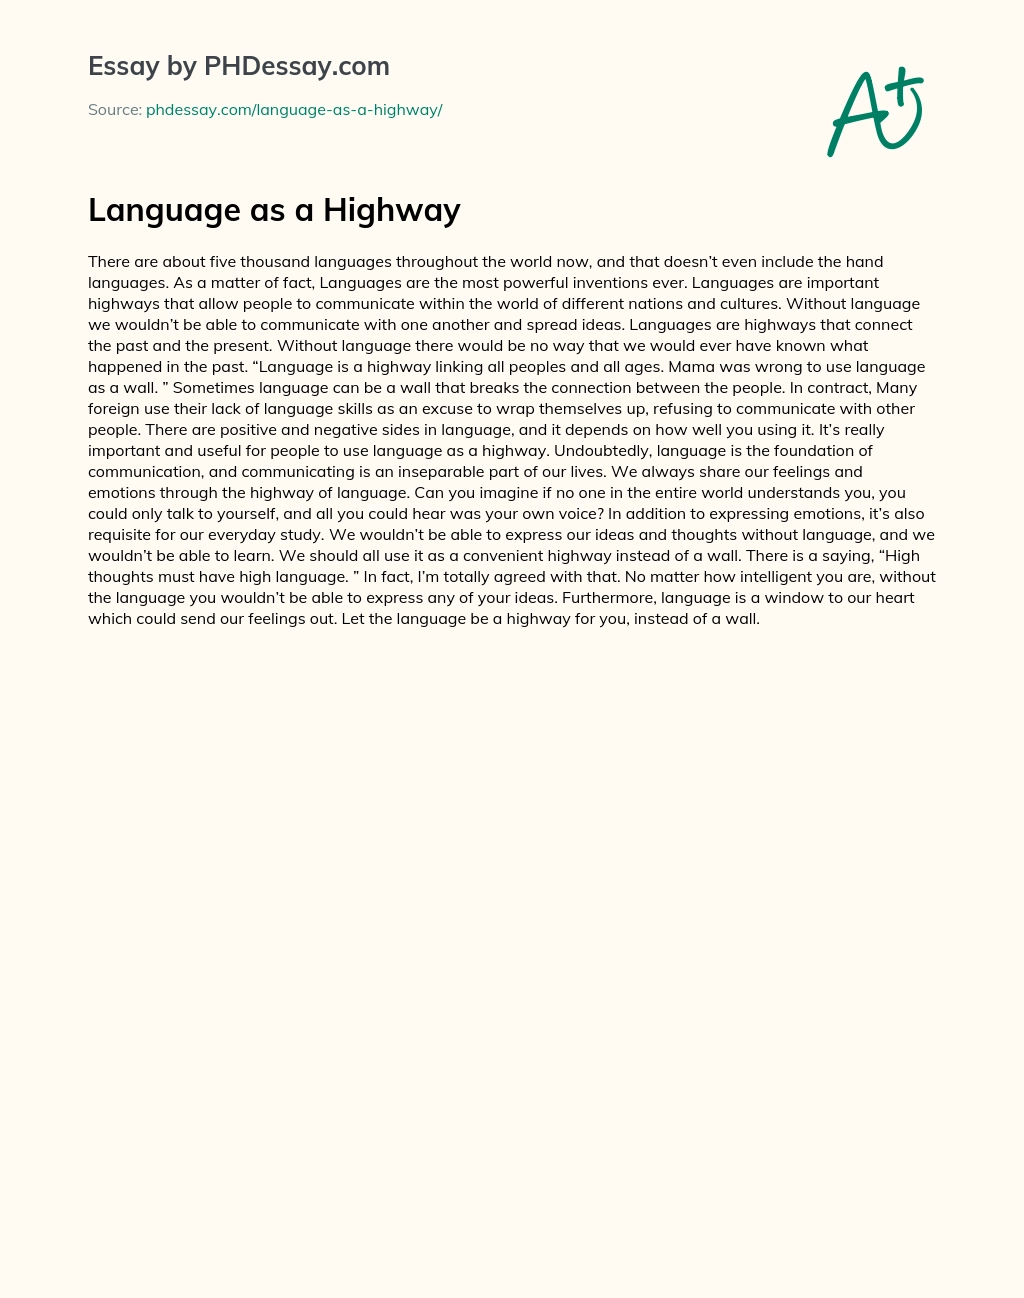 Language as a Highway essay